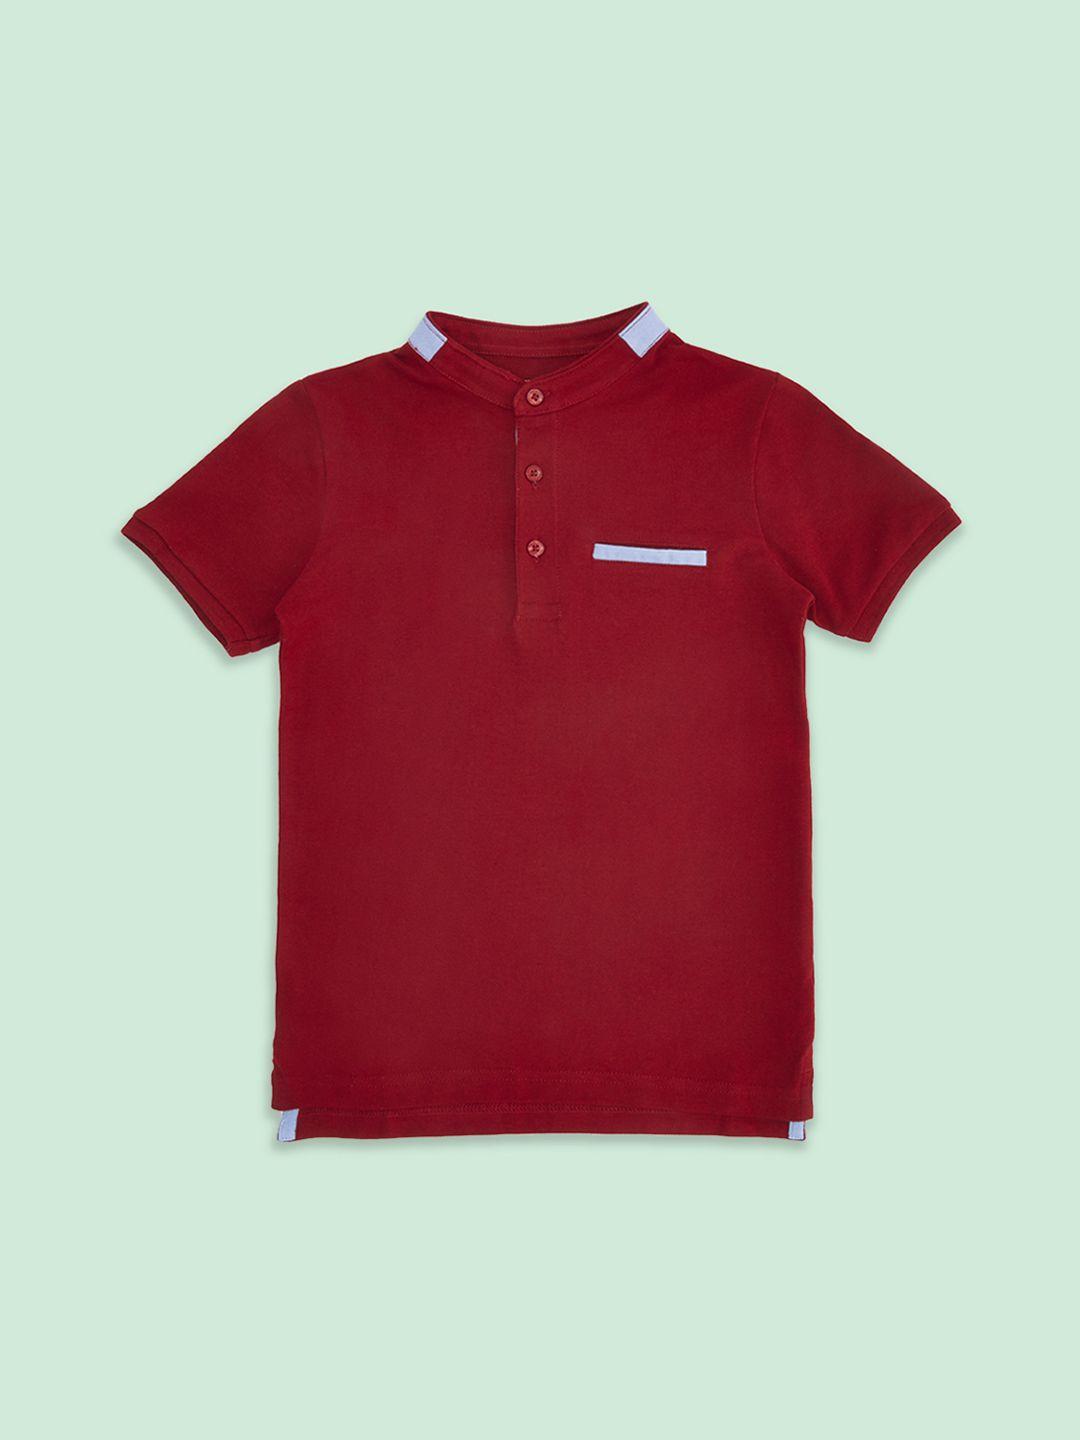 pantaloons junior boys red solid henley neck cotton t-shirt